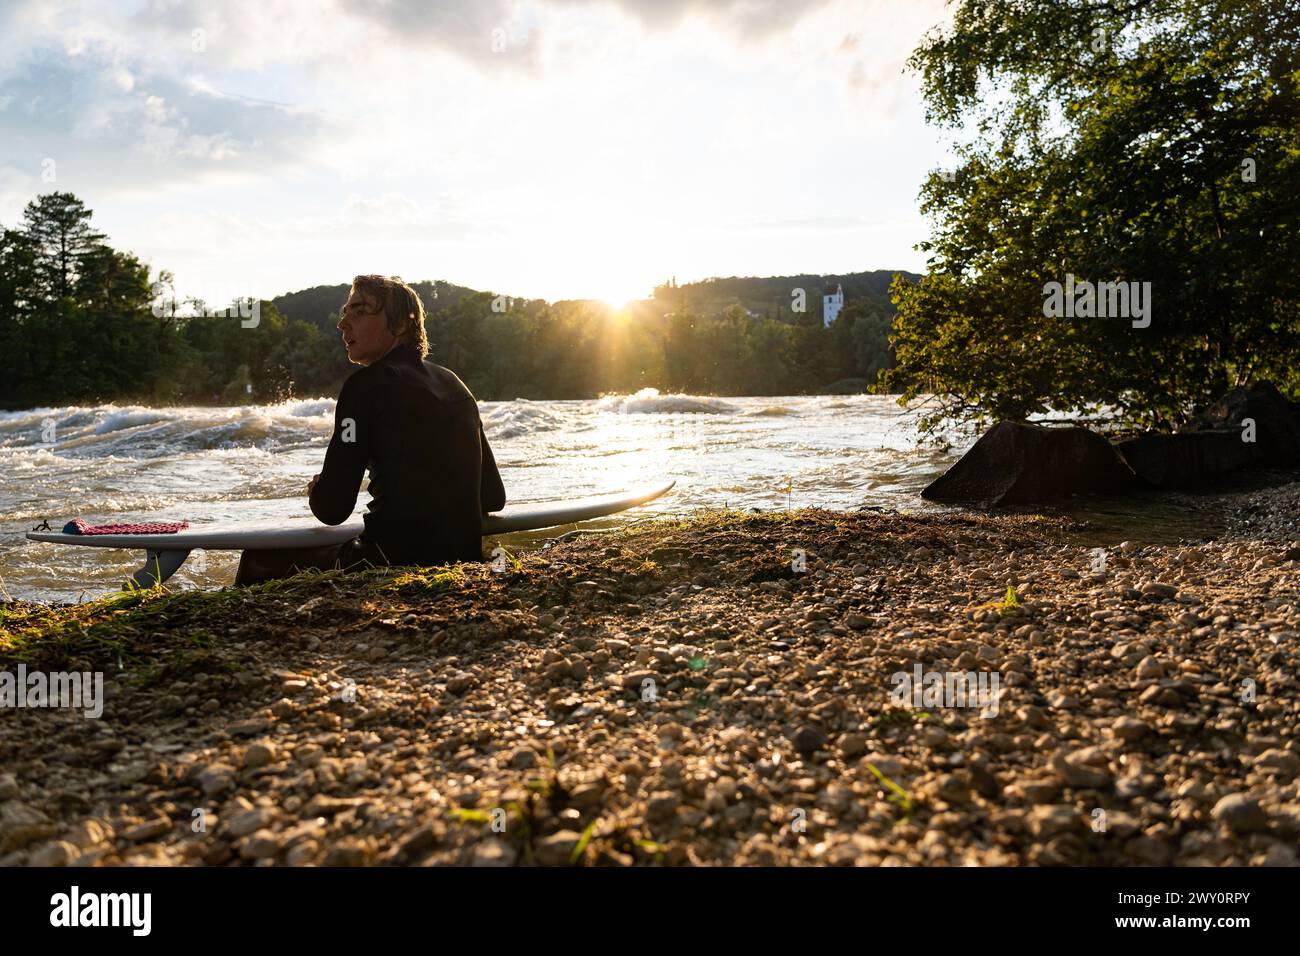 The young surfer sits by the Aare River, gazing at the sunset, enjoying the calm ambiance. Stock Photo